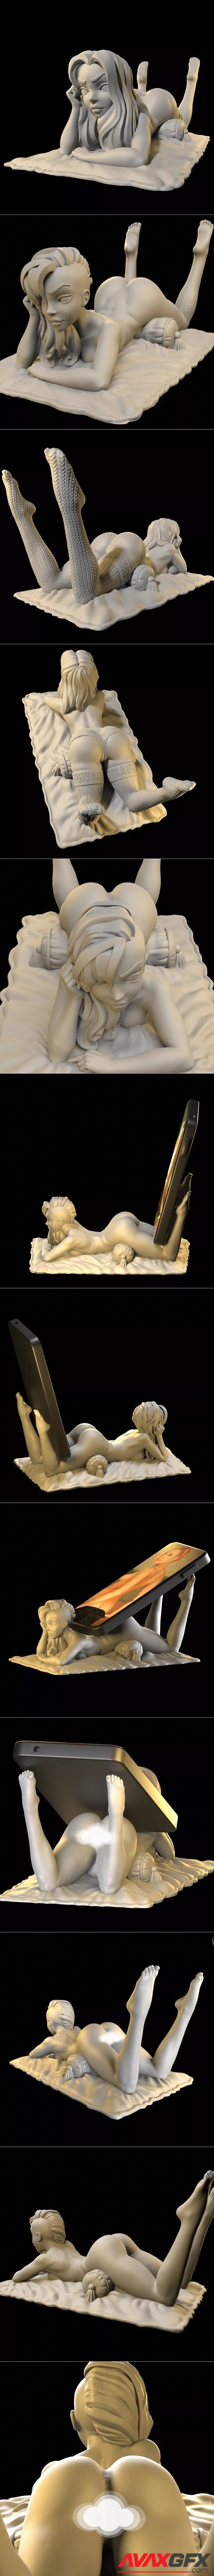 Sexy naked phone holder lady – 3D Printable STL